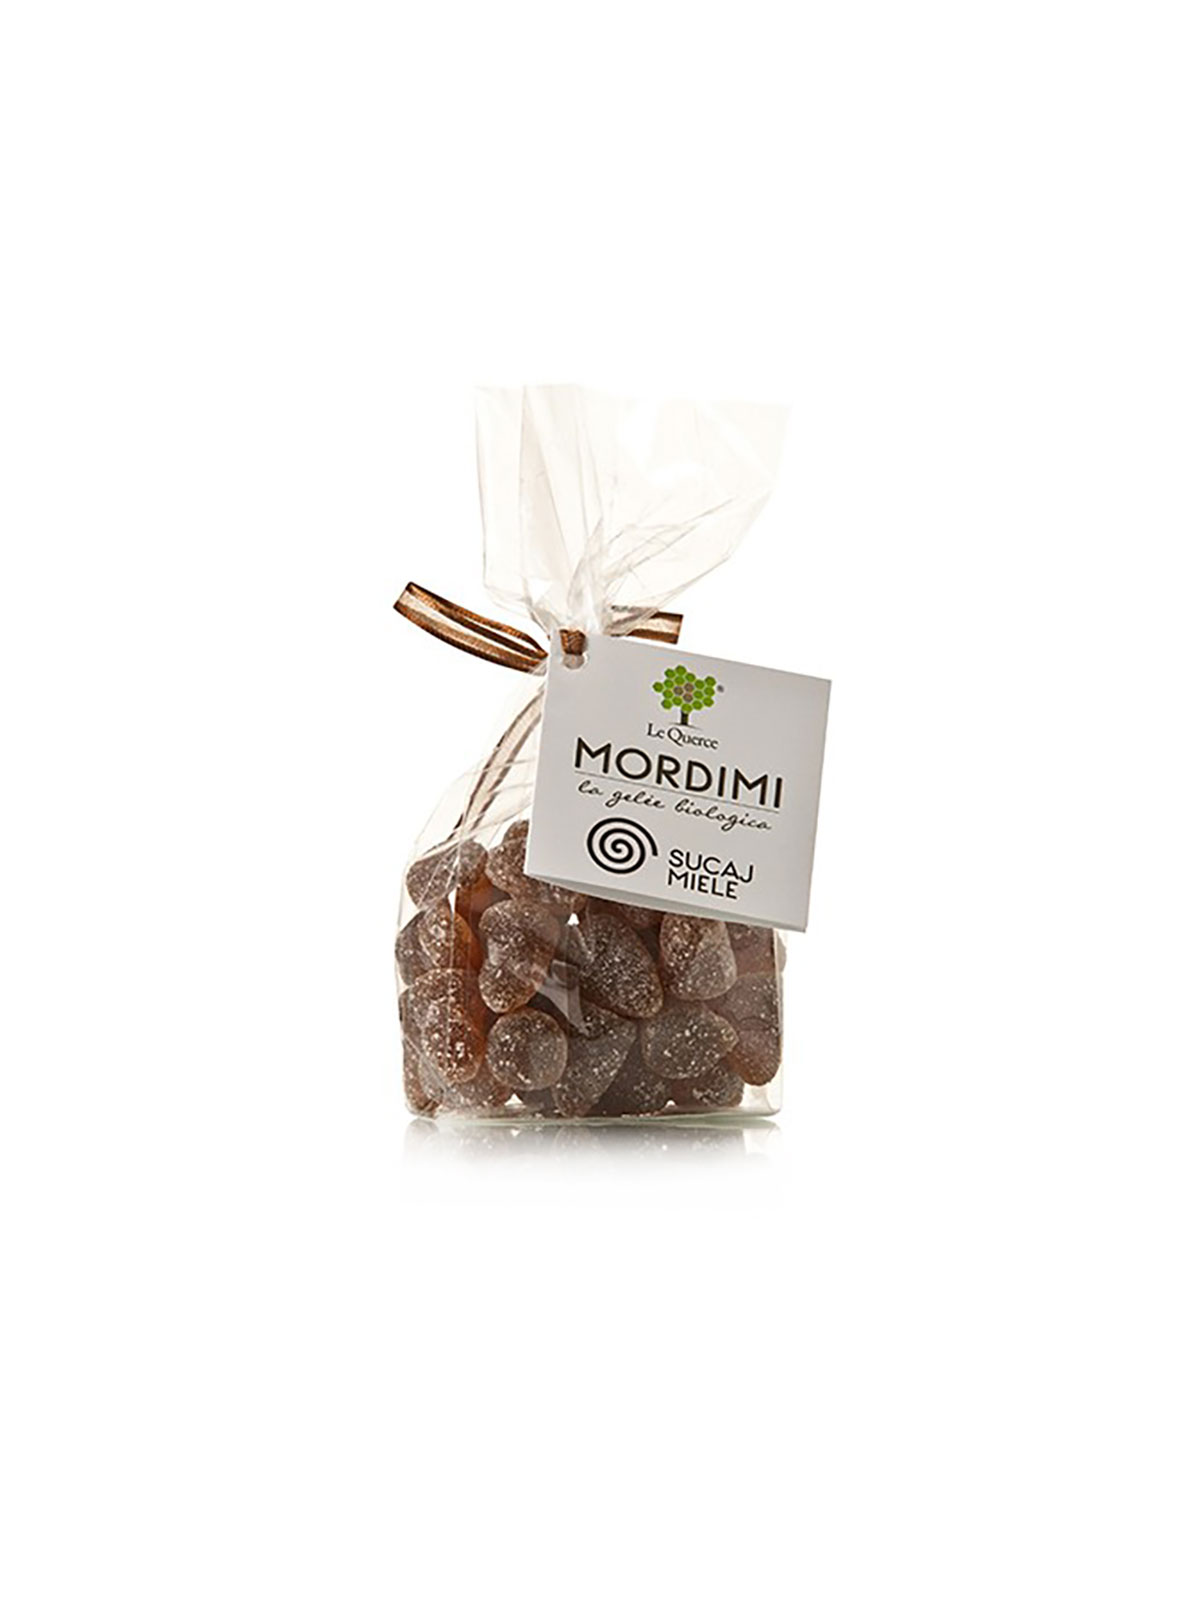 Organic Candies with Honey and Red Fruits - Sweets, Treats & Snacks - Buon'Italia